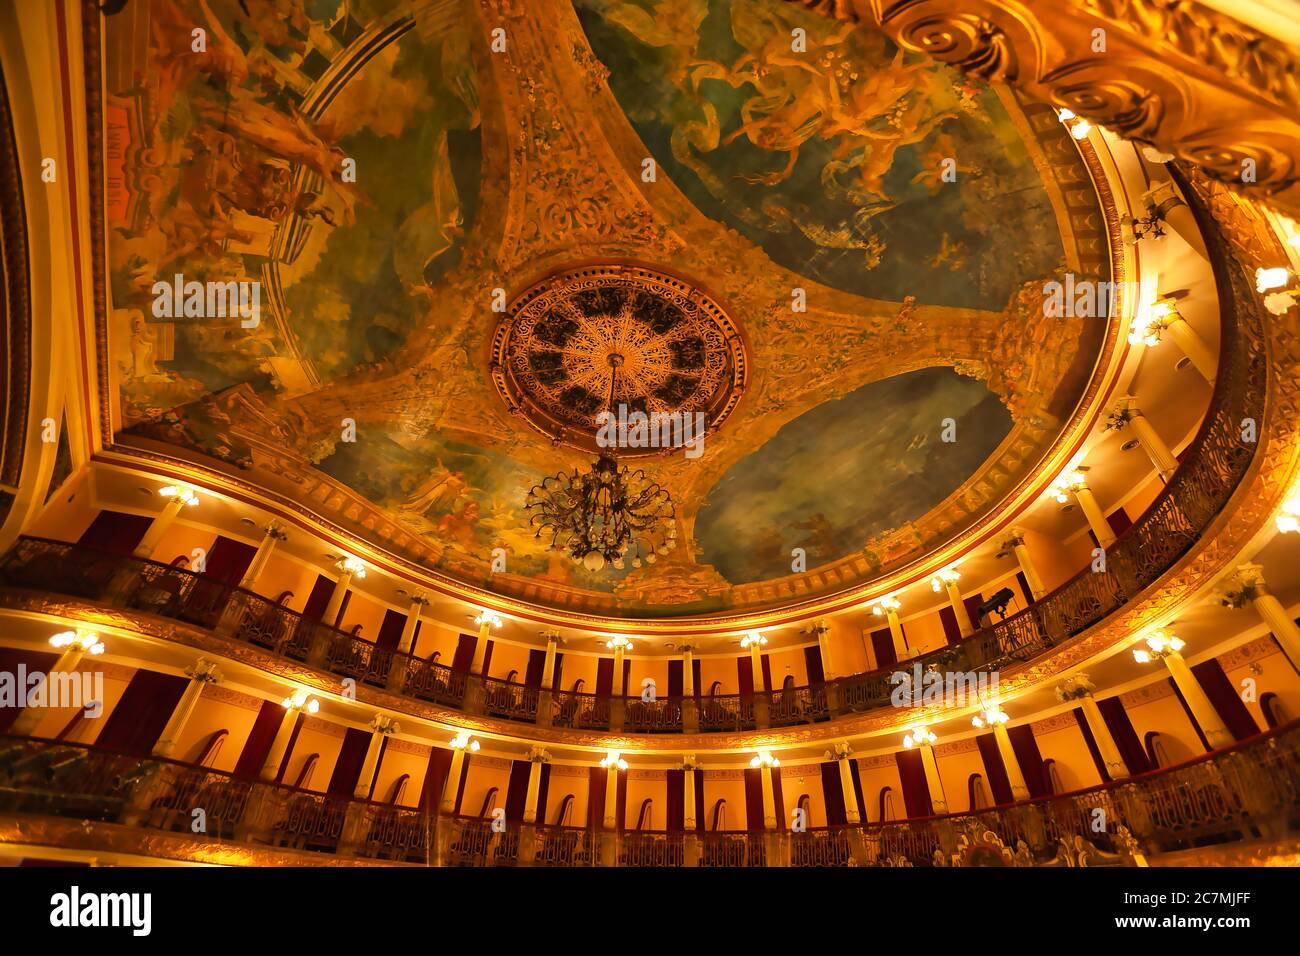 The high ceiling of the famous Opera House in Manaus showing fine detail and paintings, plus upstairs seating, Manaus, Amazonas State, Brazil Stock Photo